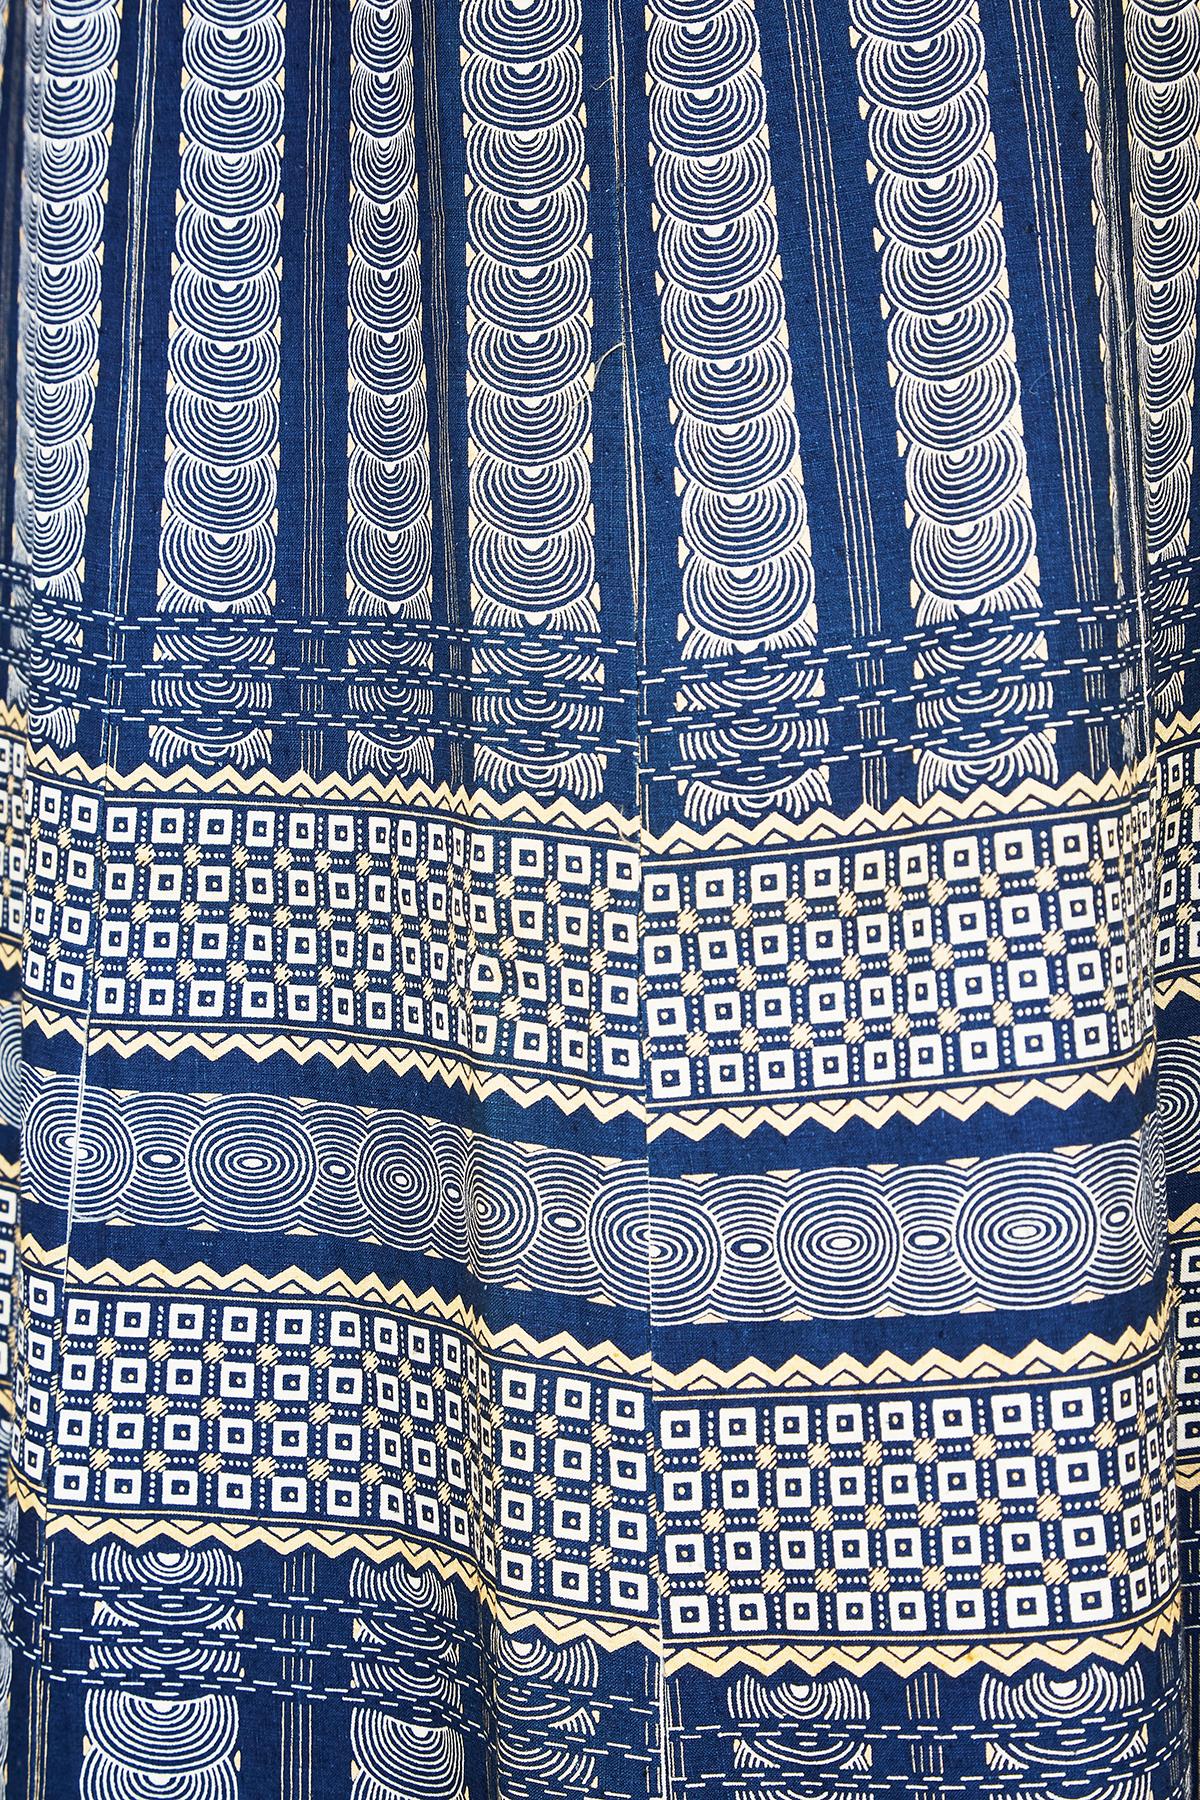 Superb print and tailoring on this ankle length original 1970s maxi skirt.  The waist and hem flounce feature a pixilated diamond pattern but the real star of the show is the geometric deco print interspersed with two wide horizontal band of squares